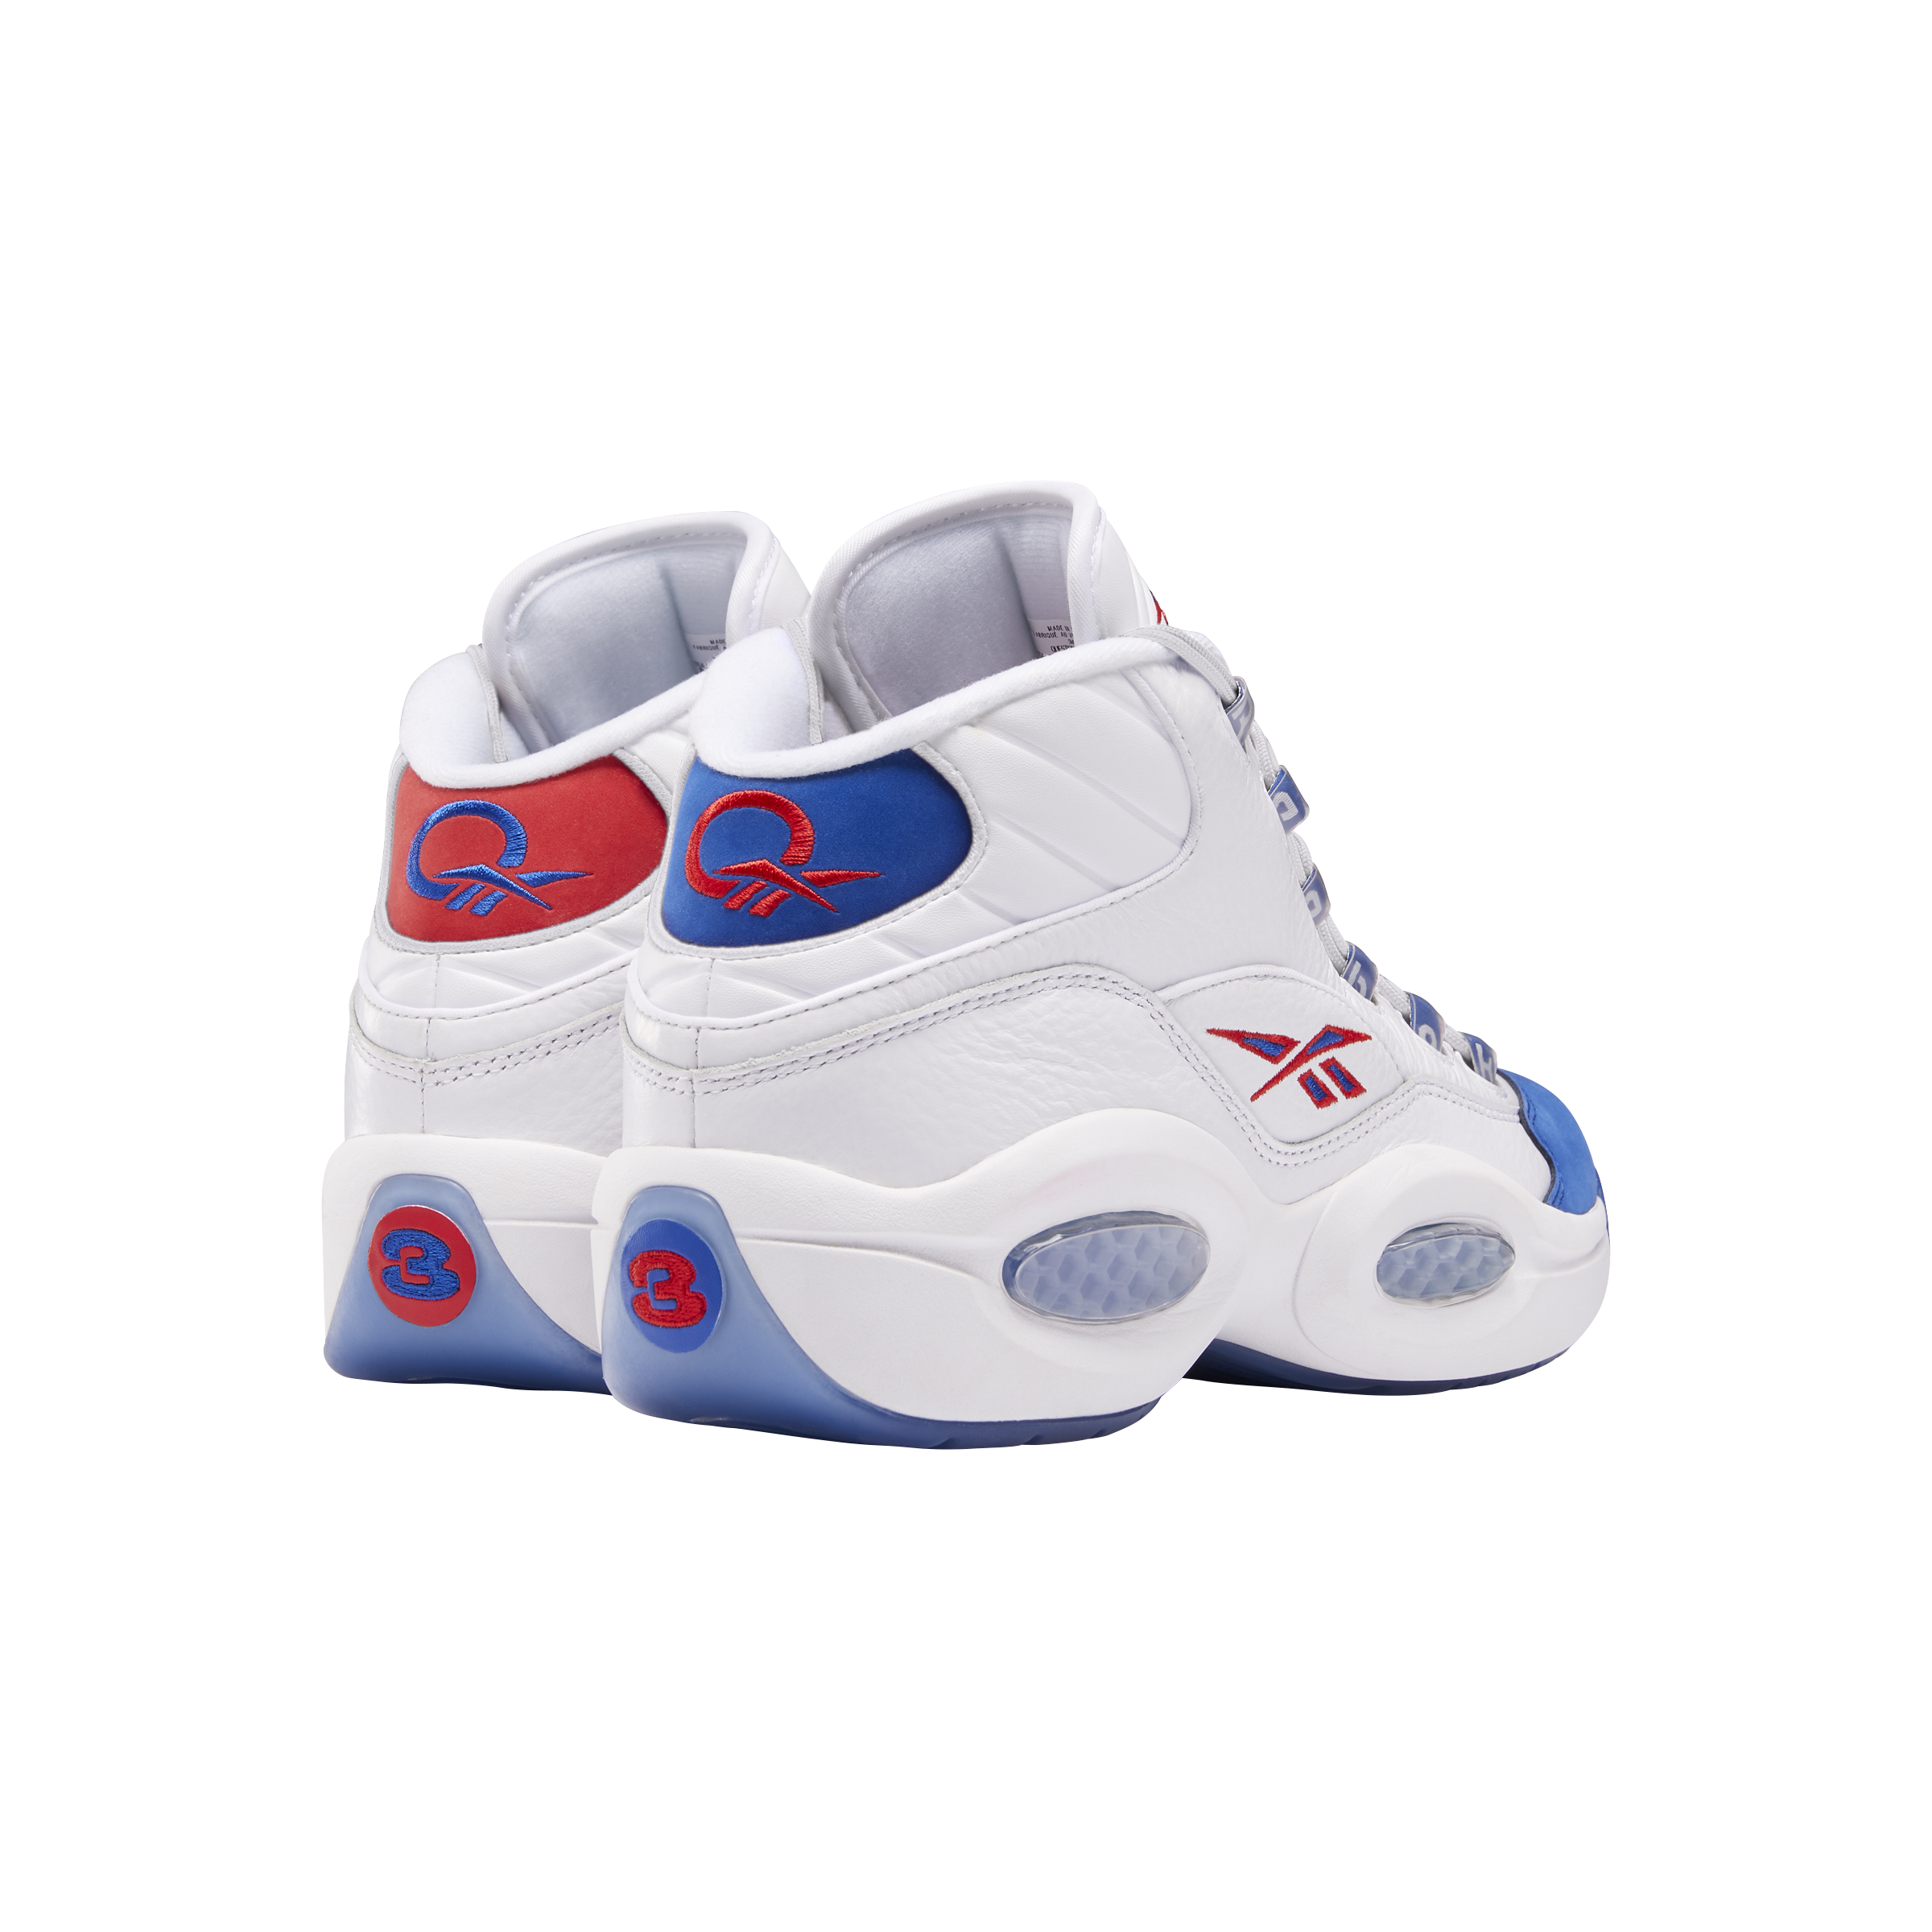 Reebok Launches the Crossover U  Celebrating Allen Iverson Legacy